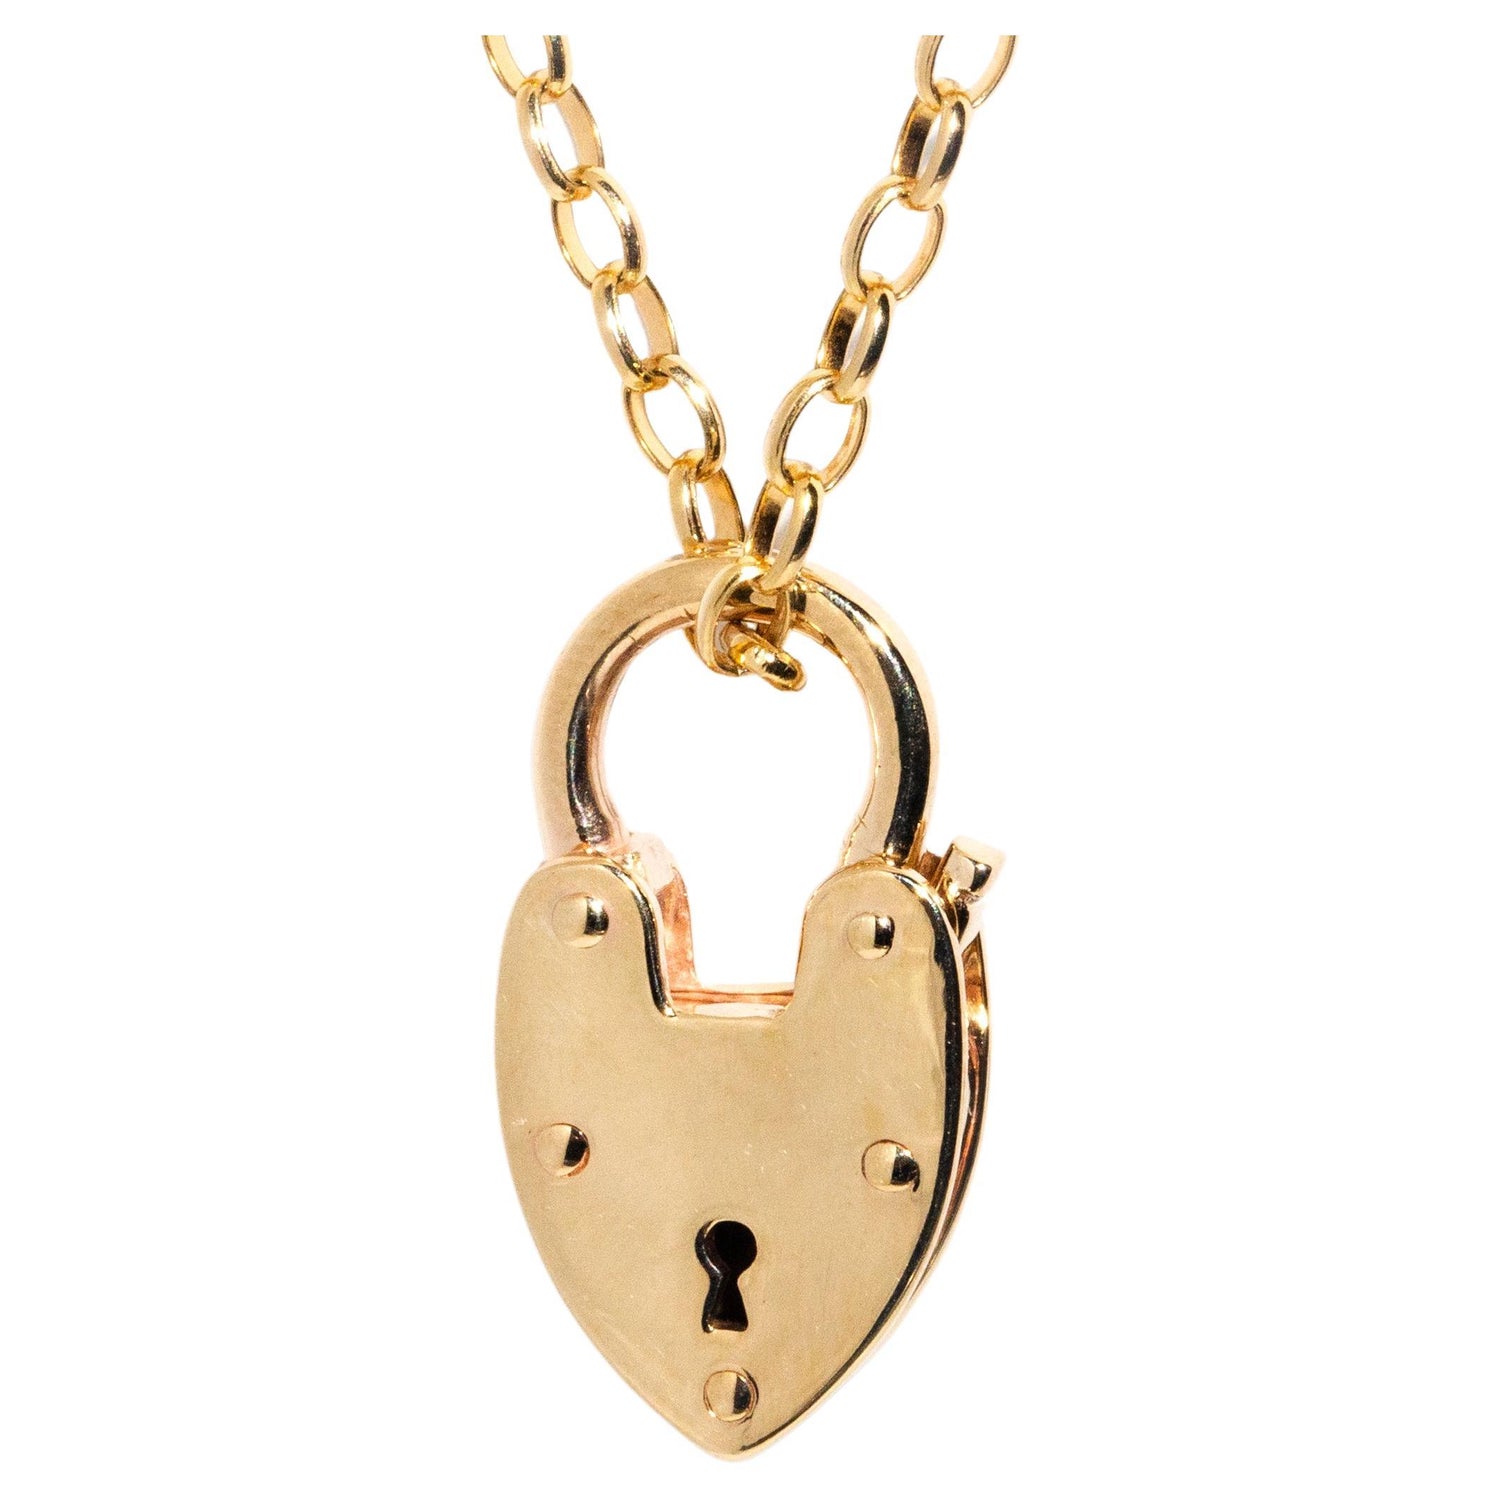 Vintage circa 1950s Heart Locket with Belcher Chain in 9 Carat Yellow Gold